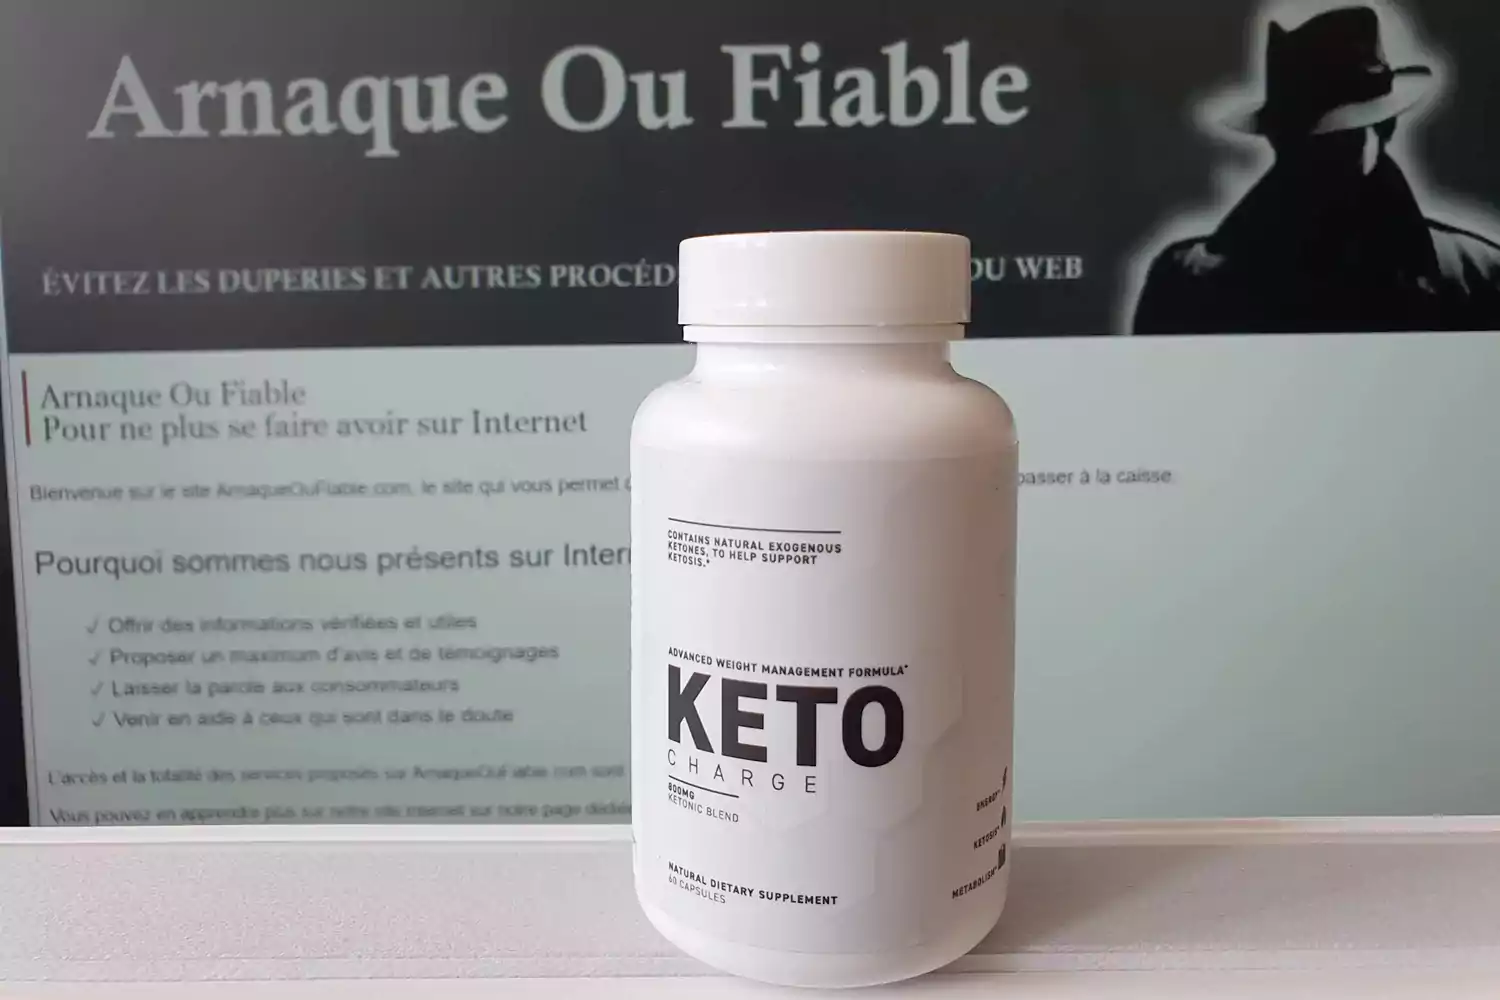 KetoCharge Arnaque Ou Fiable